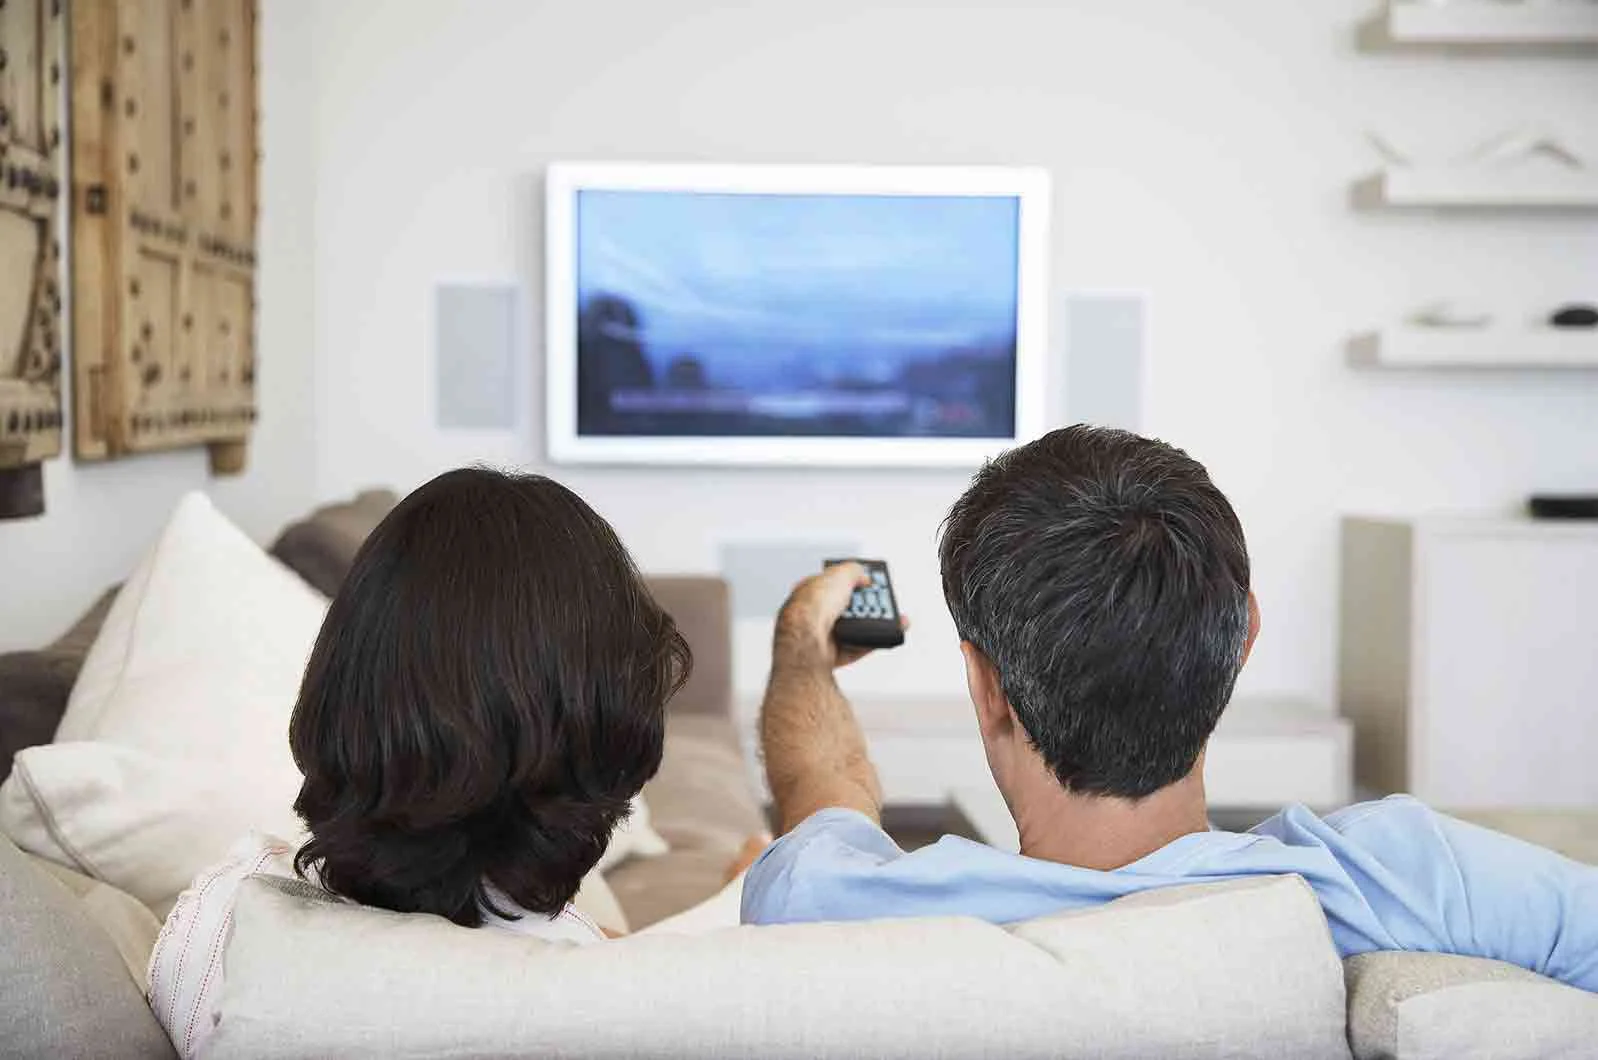 Couple watching TV, one of them holding the remote control. Concept of subtitling service.